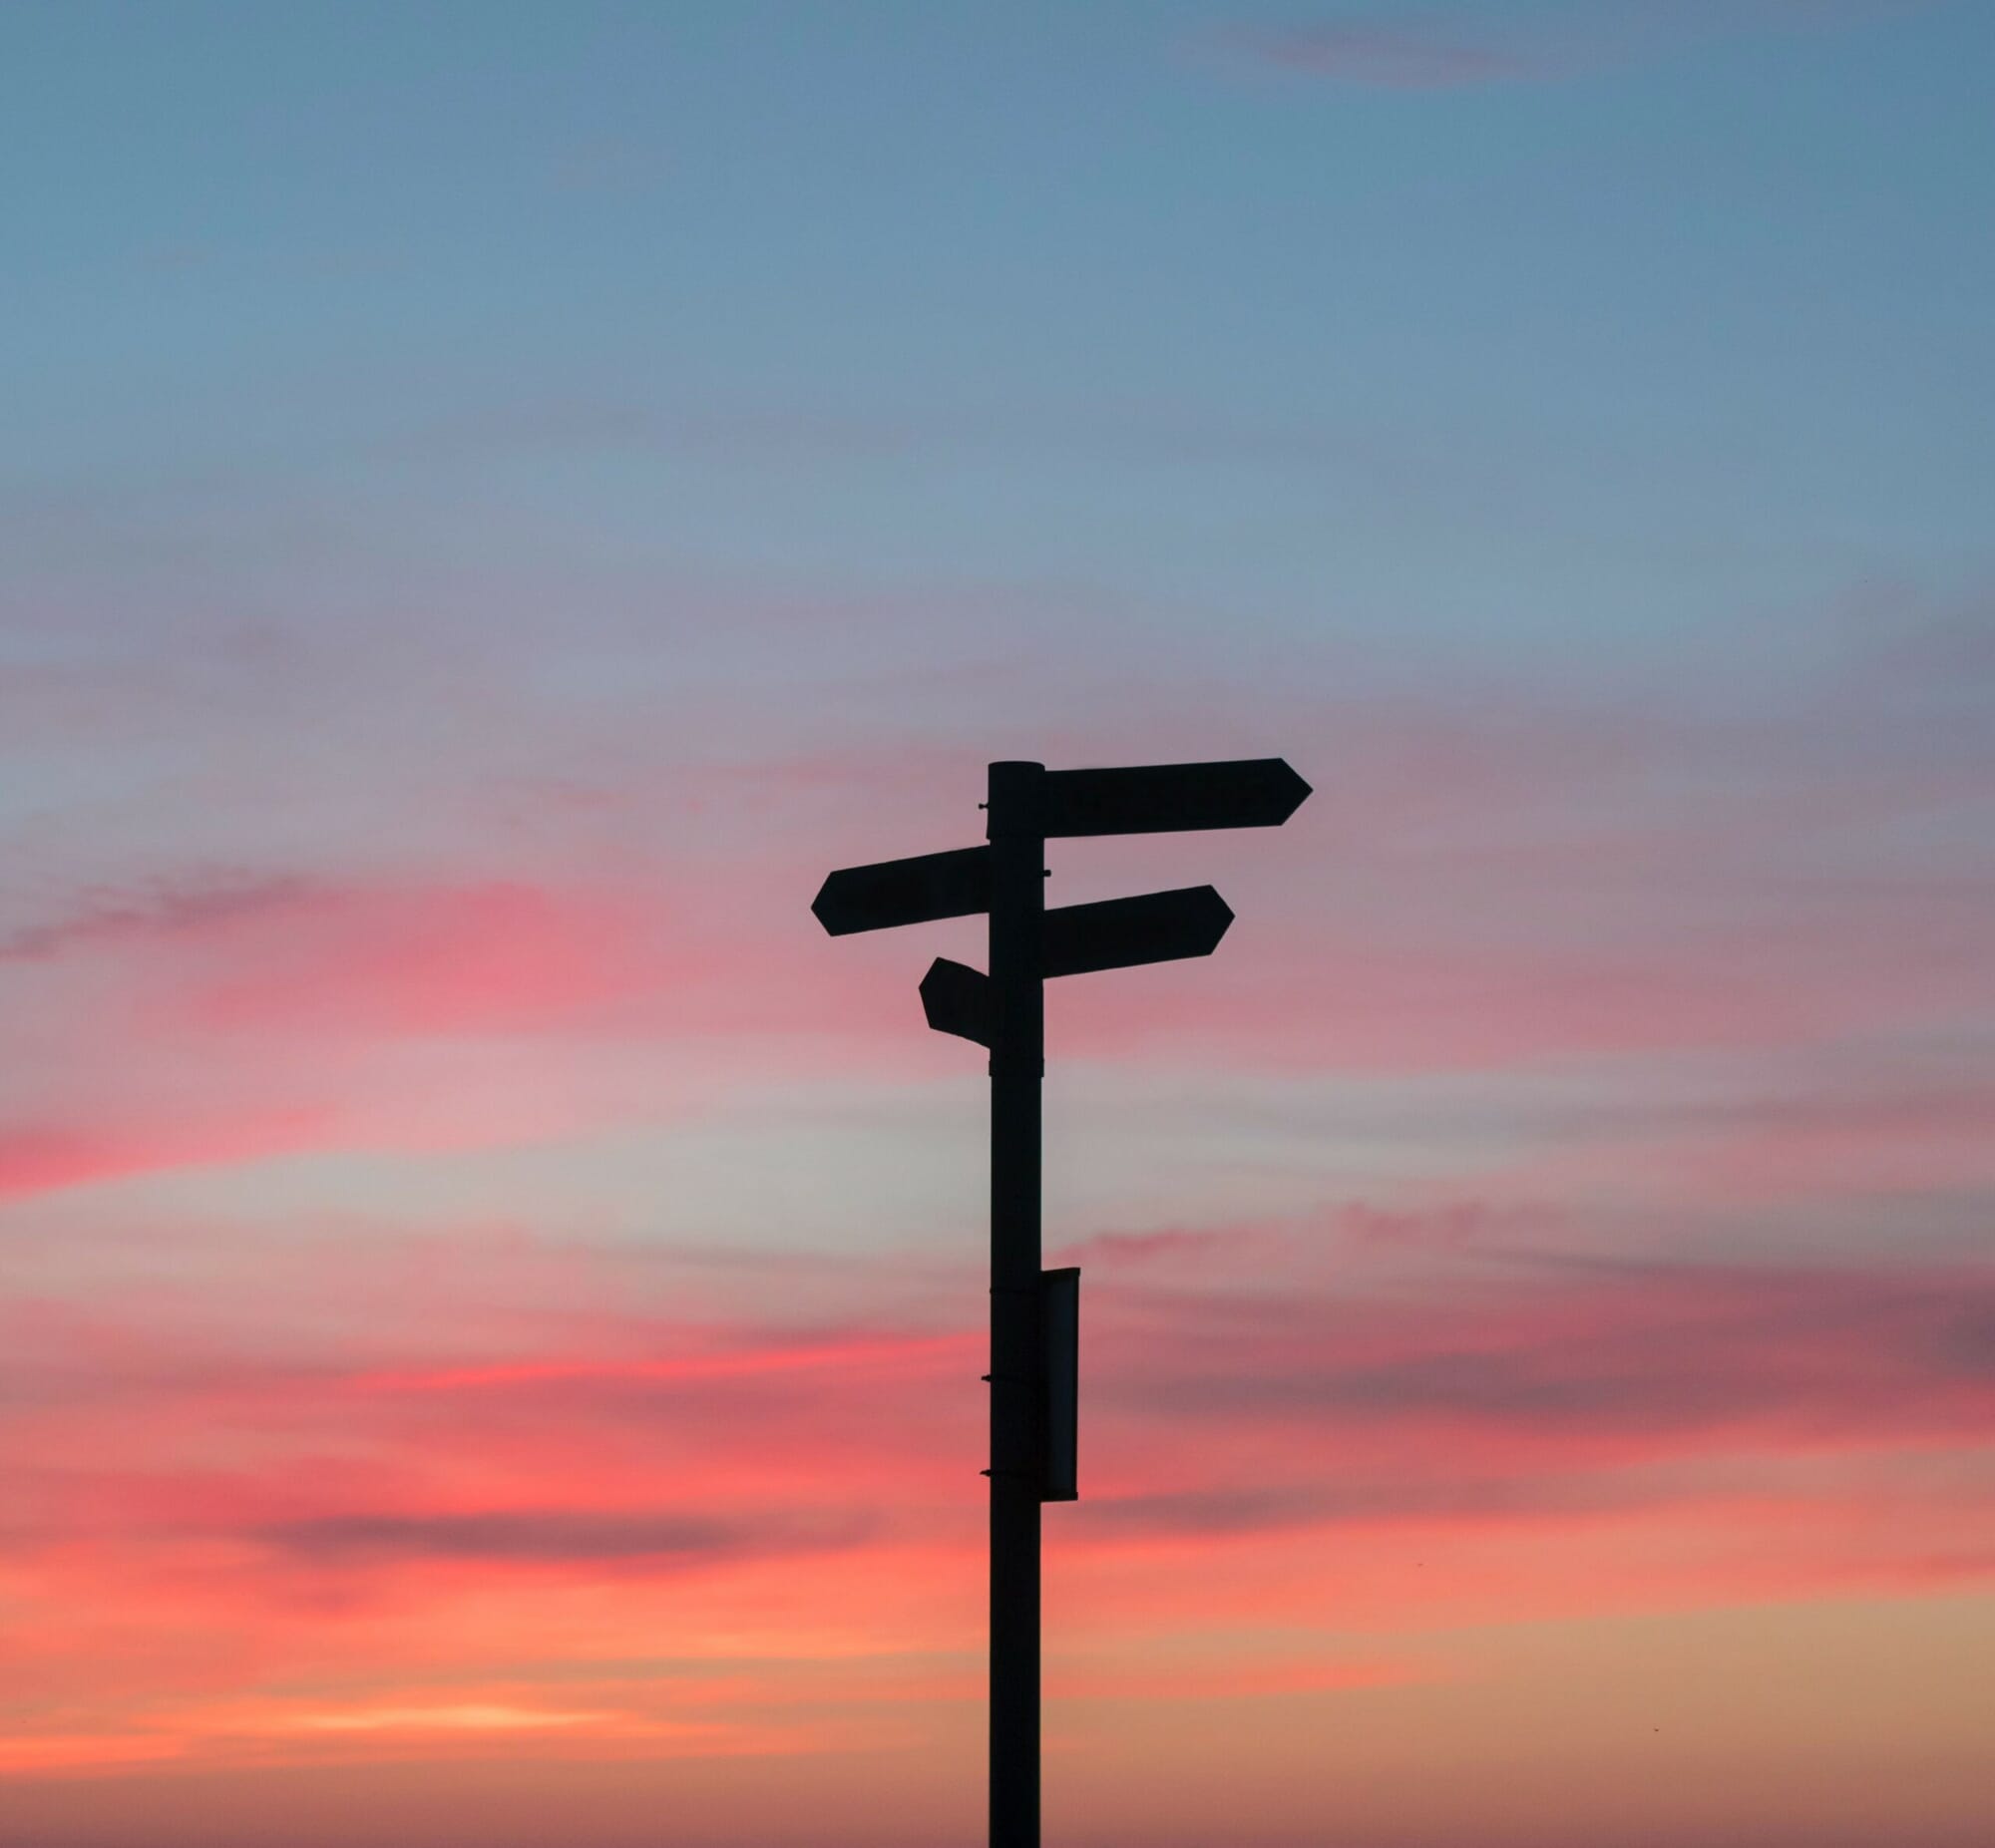 signs-with-sunset-scaled.jpg?w=2000&h=1853&scale